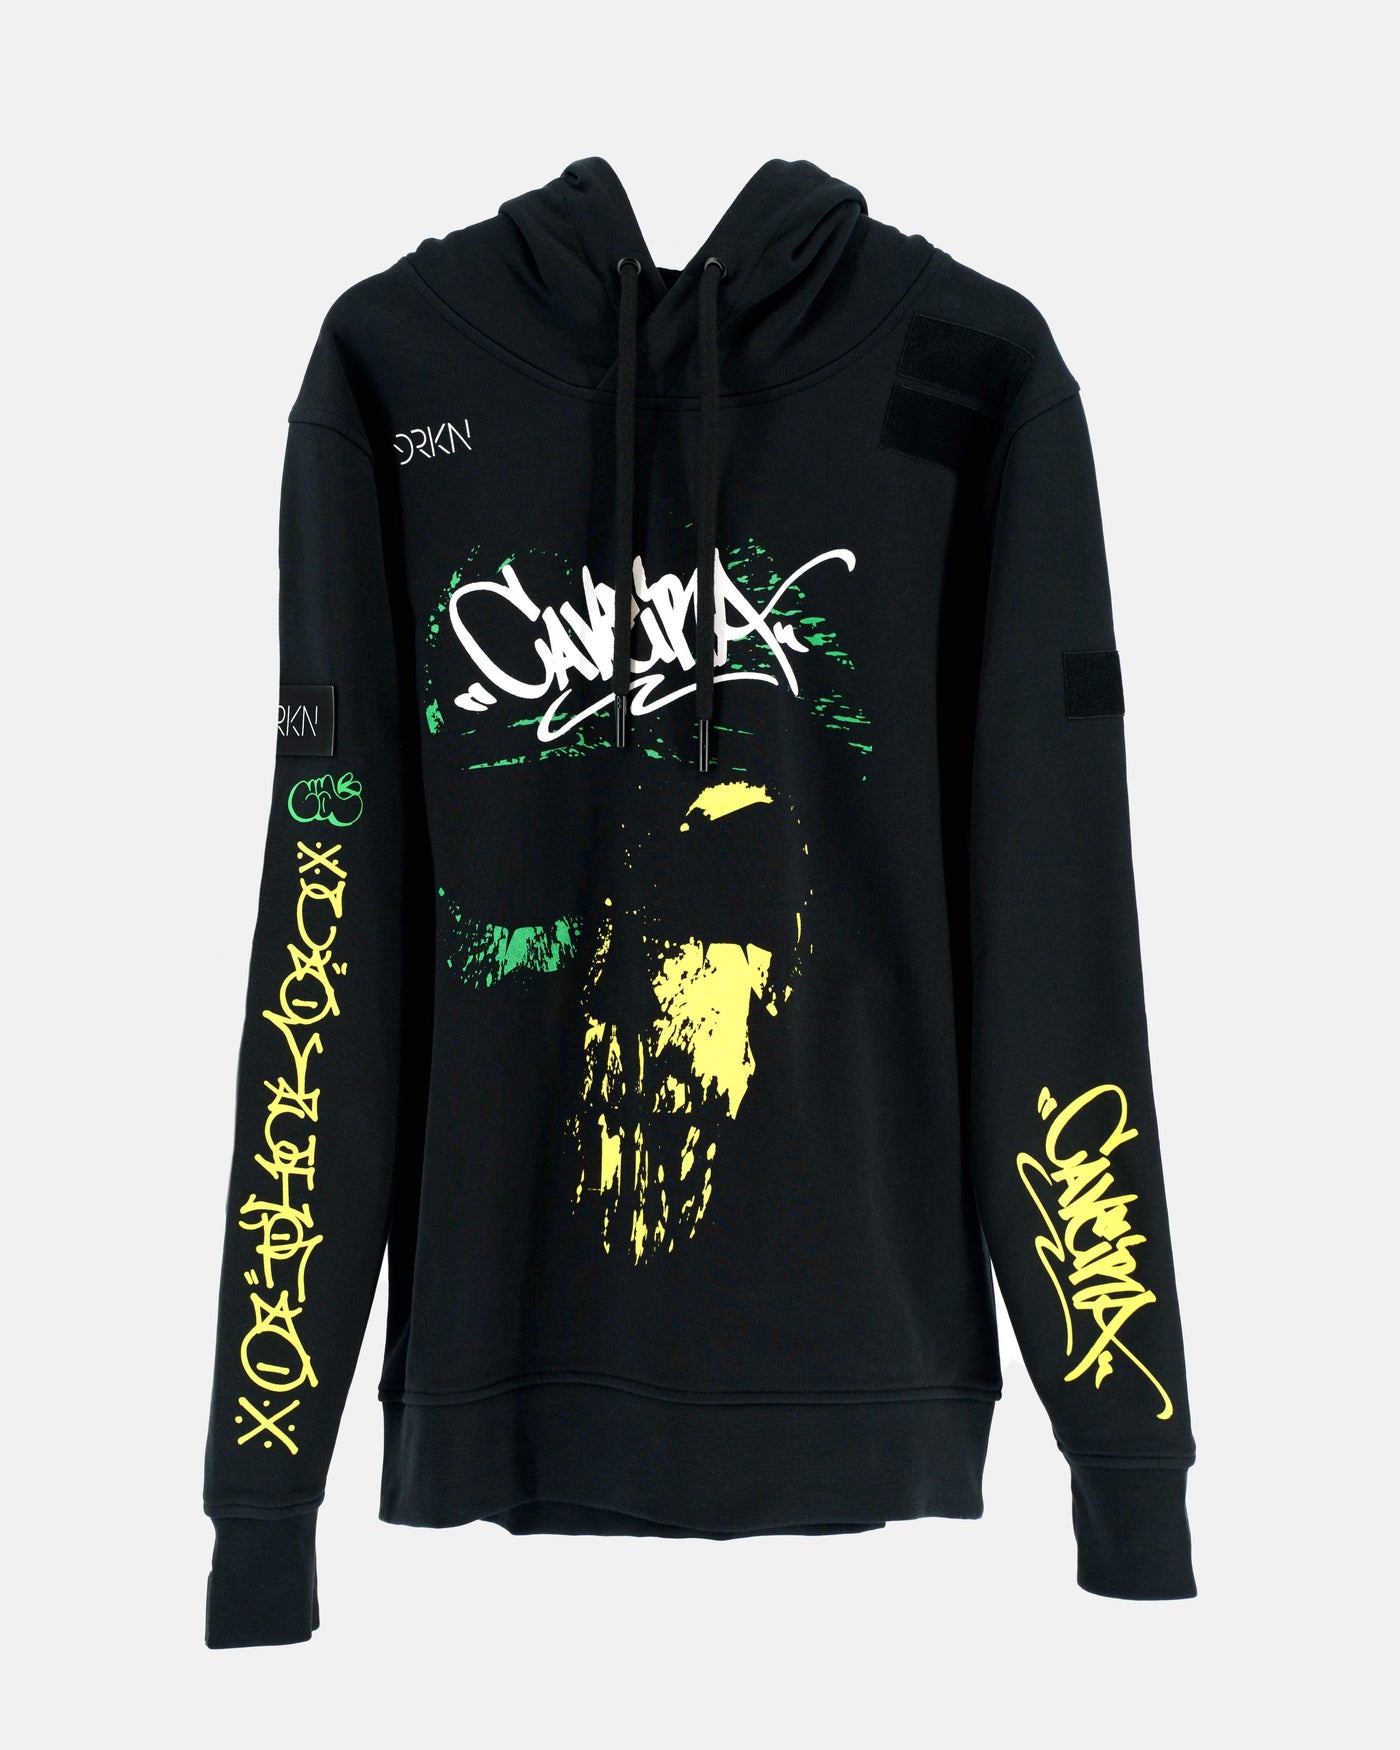 Black hoodie with a white, green and yellow grafiti print. Tribute to the operator Caveira from the game Rainbow Six.